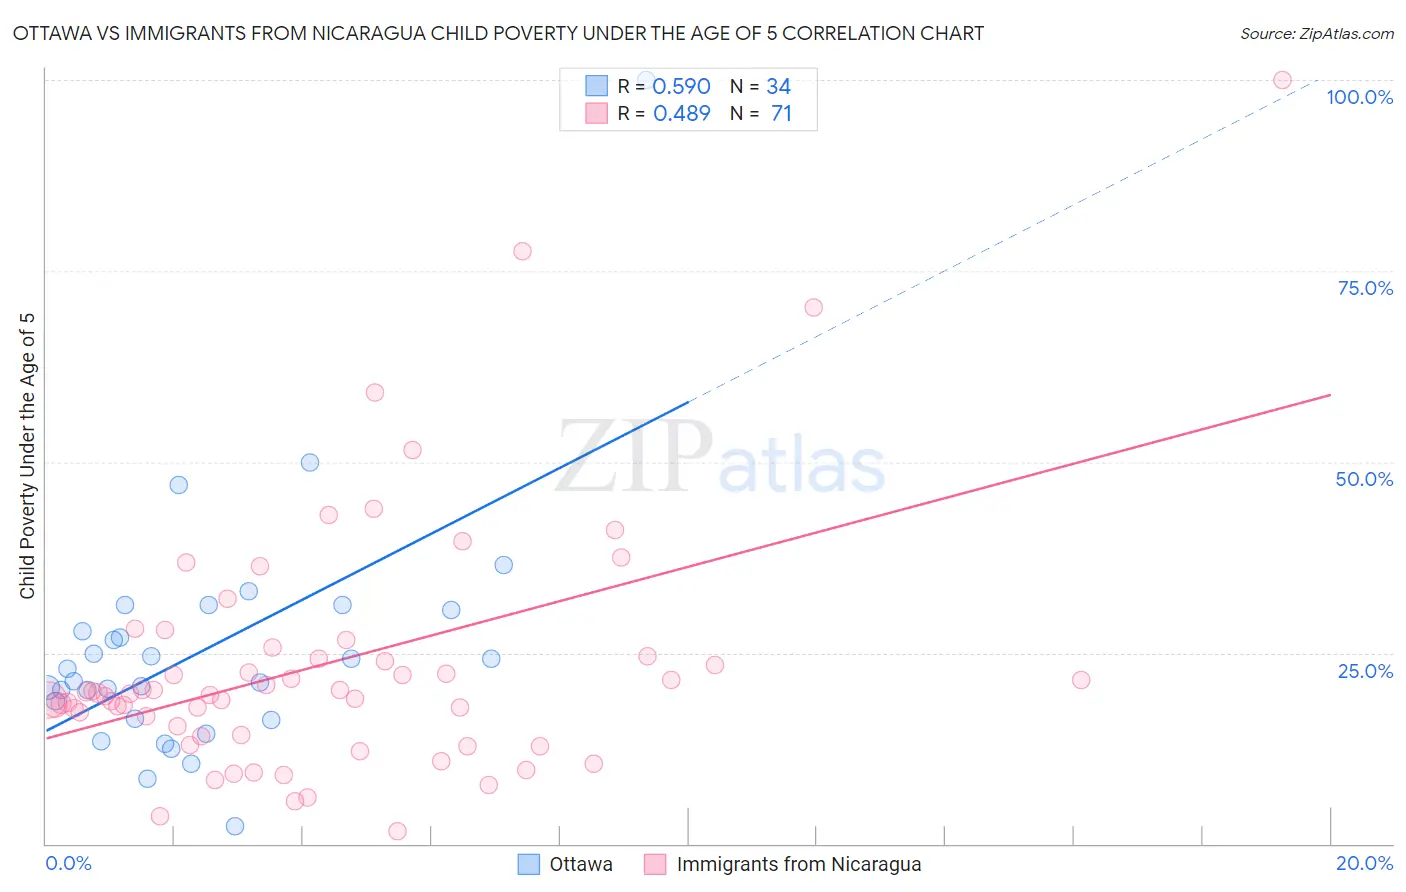 Ottawa vs Immigrants from Nicaragua Child Poverty Under the Age of 5